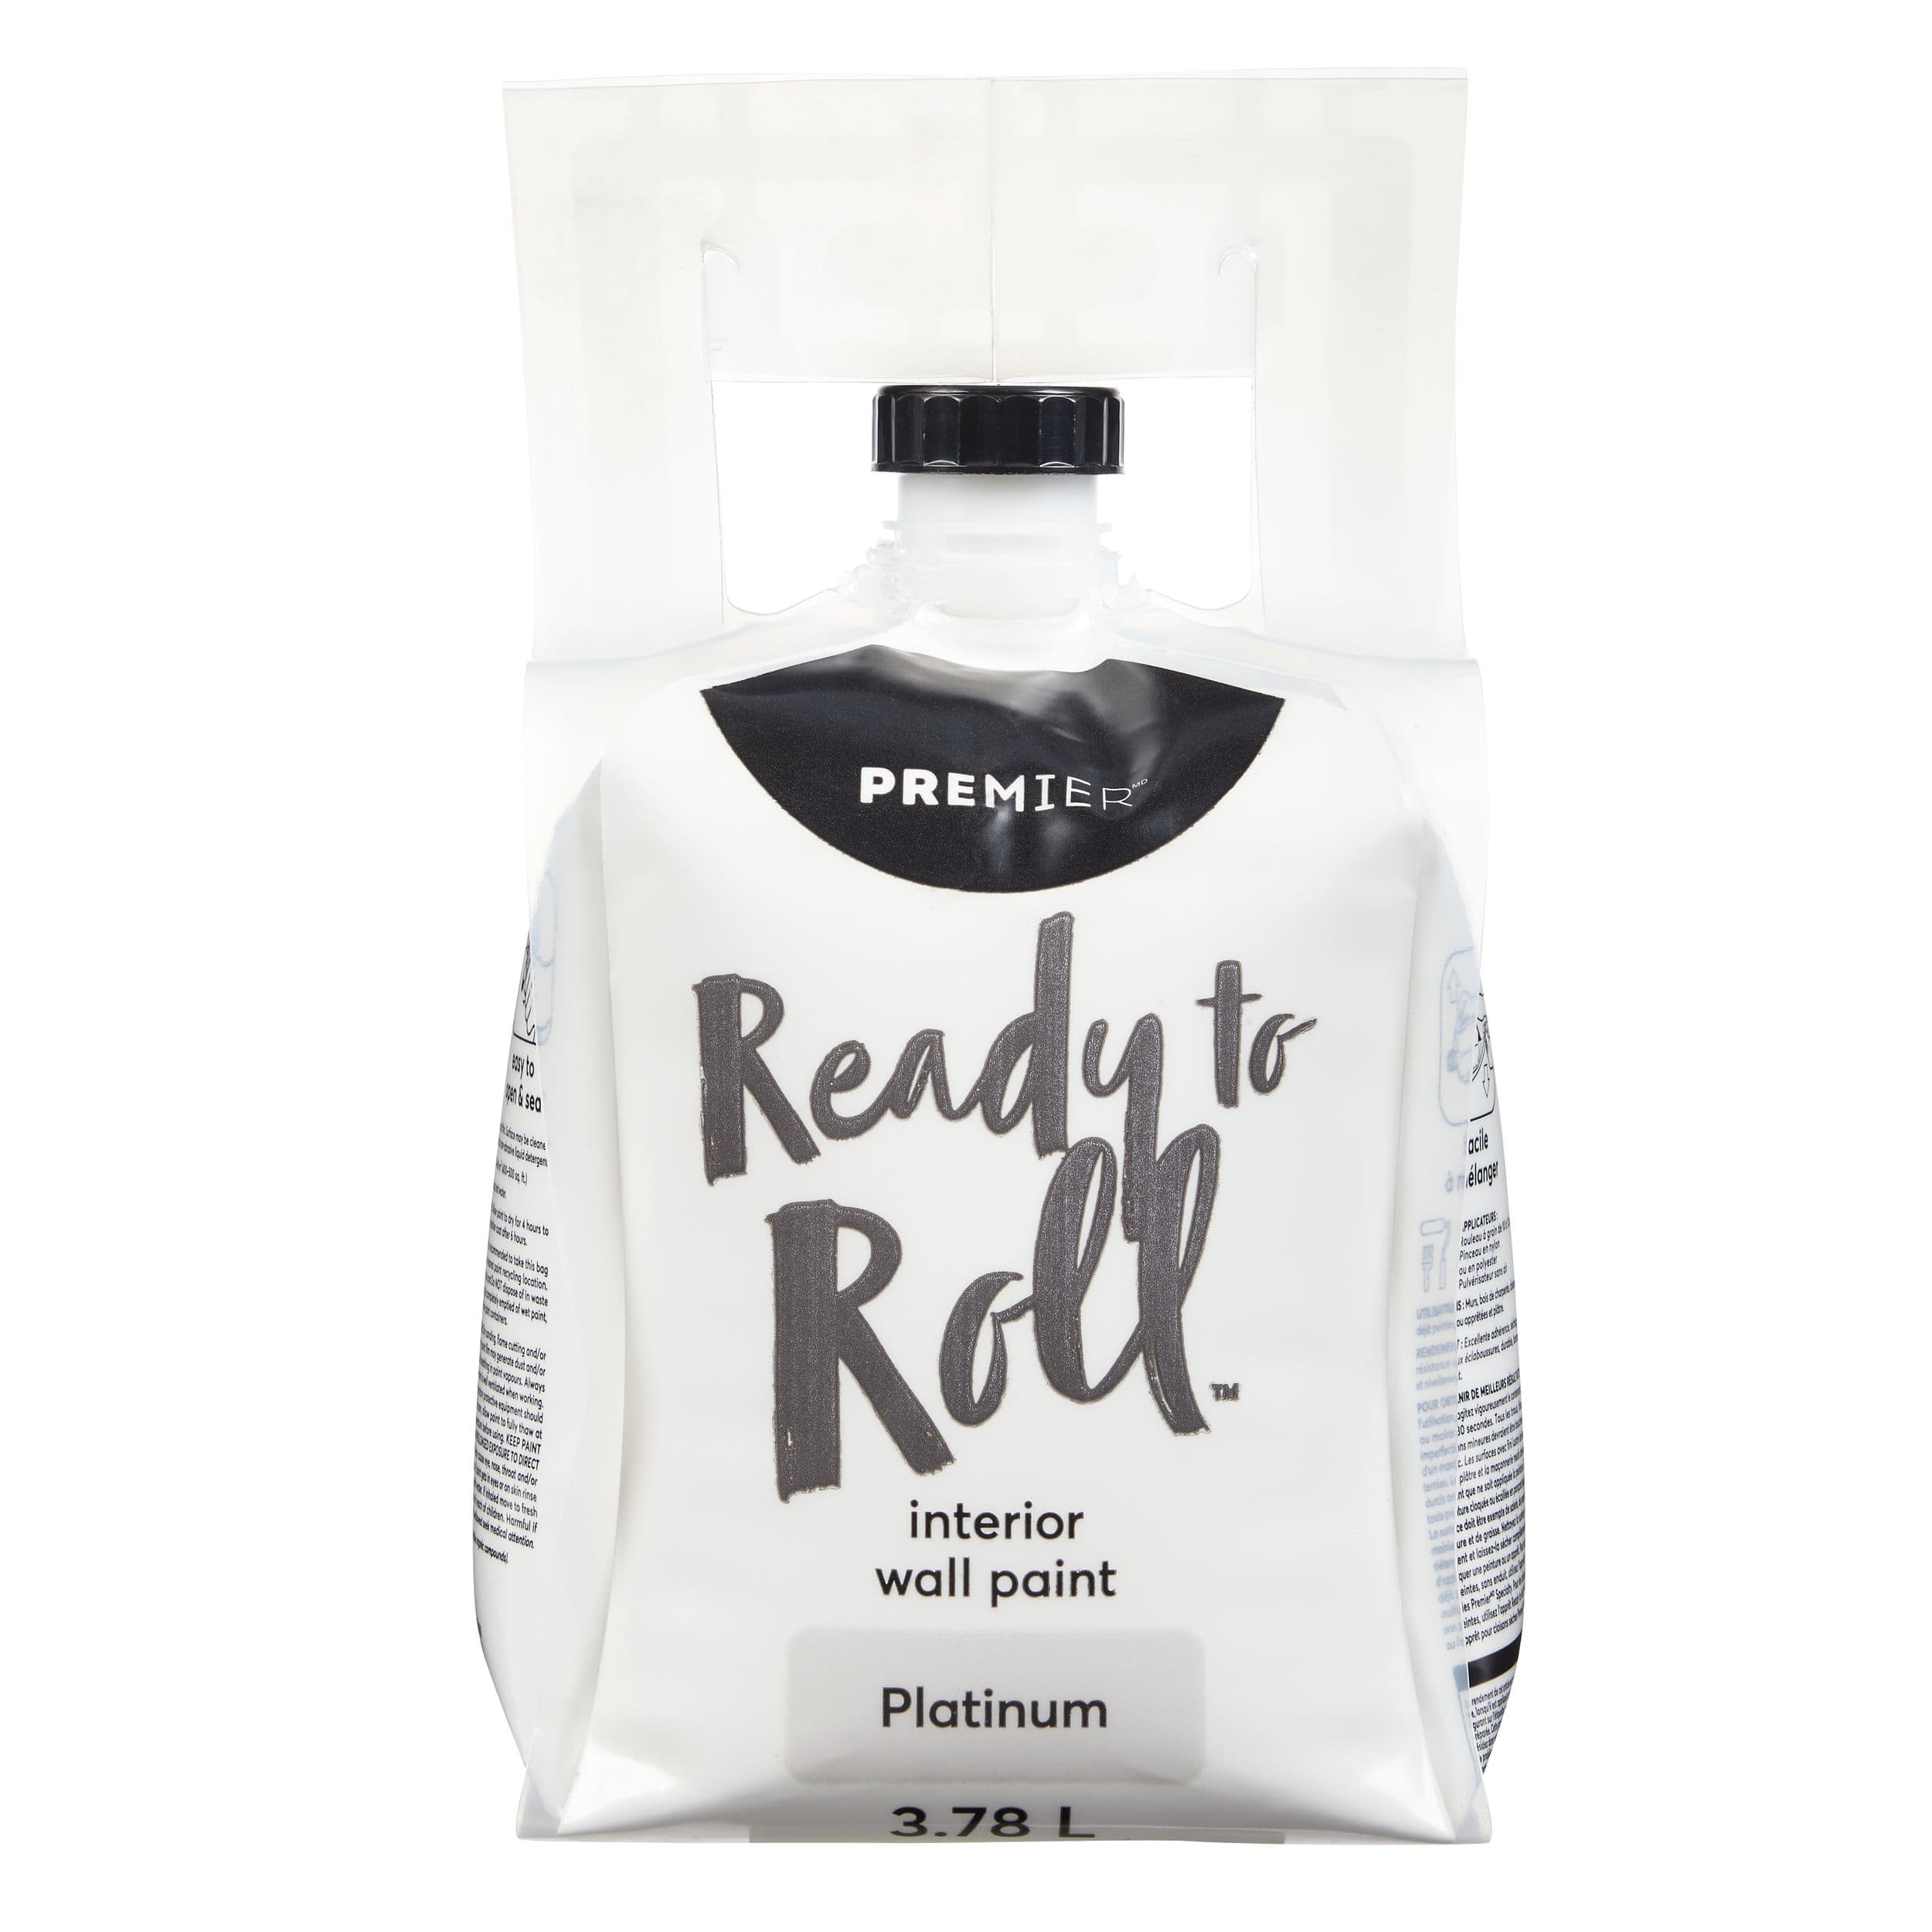 Premier Ready To Roll Interior Wall Paint, Eggshell, Platinum